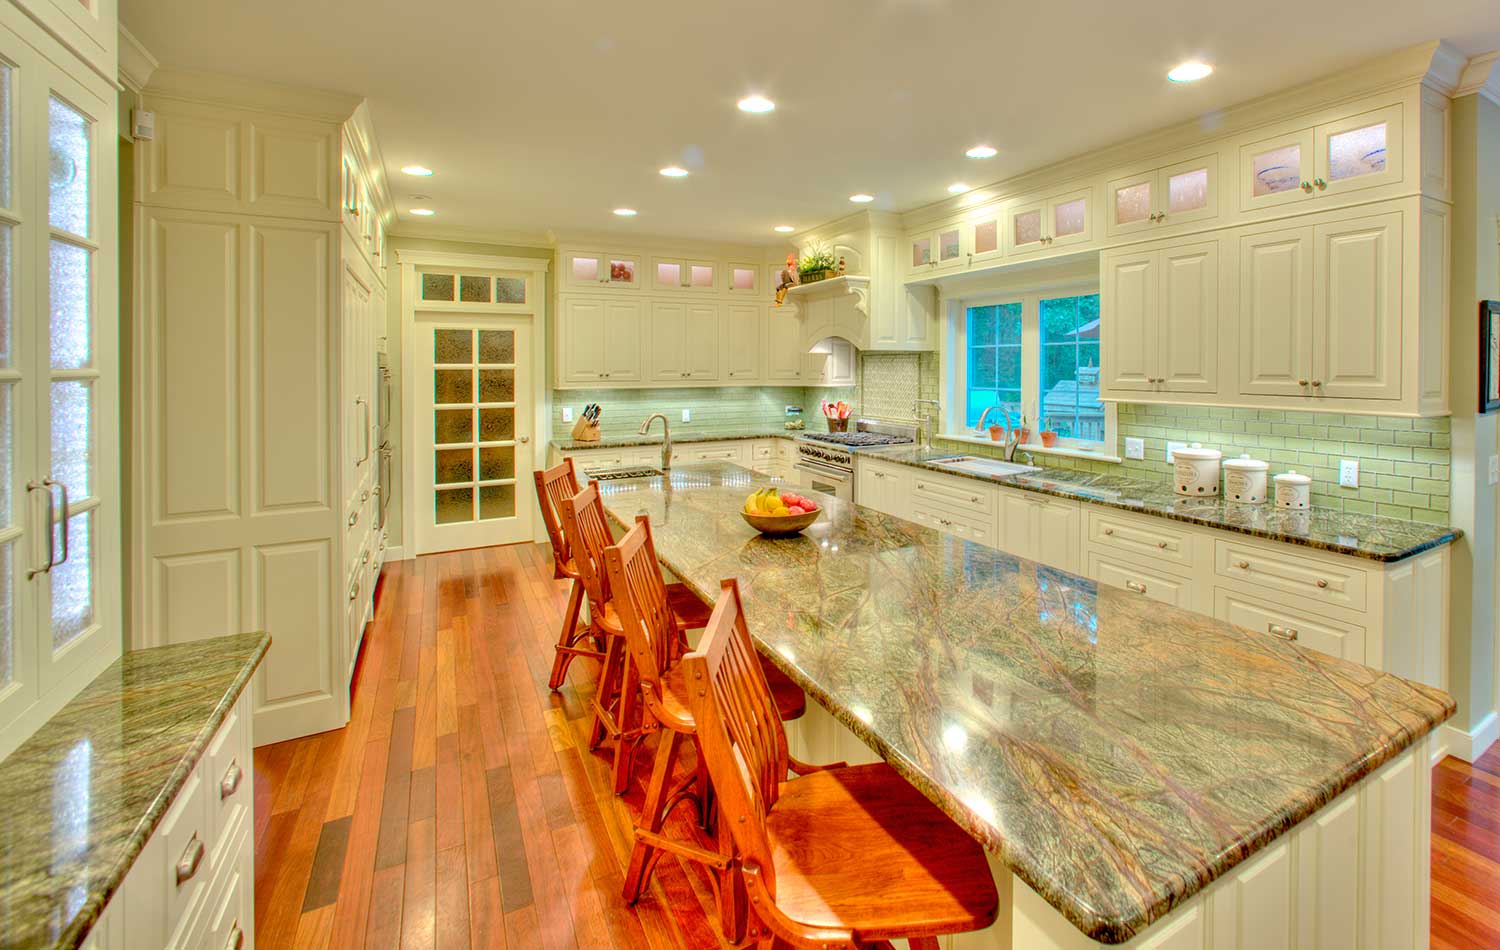 Remodeled kitchen space for a busy family